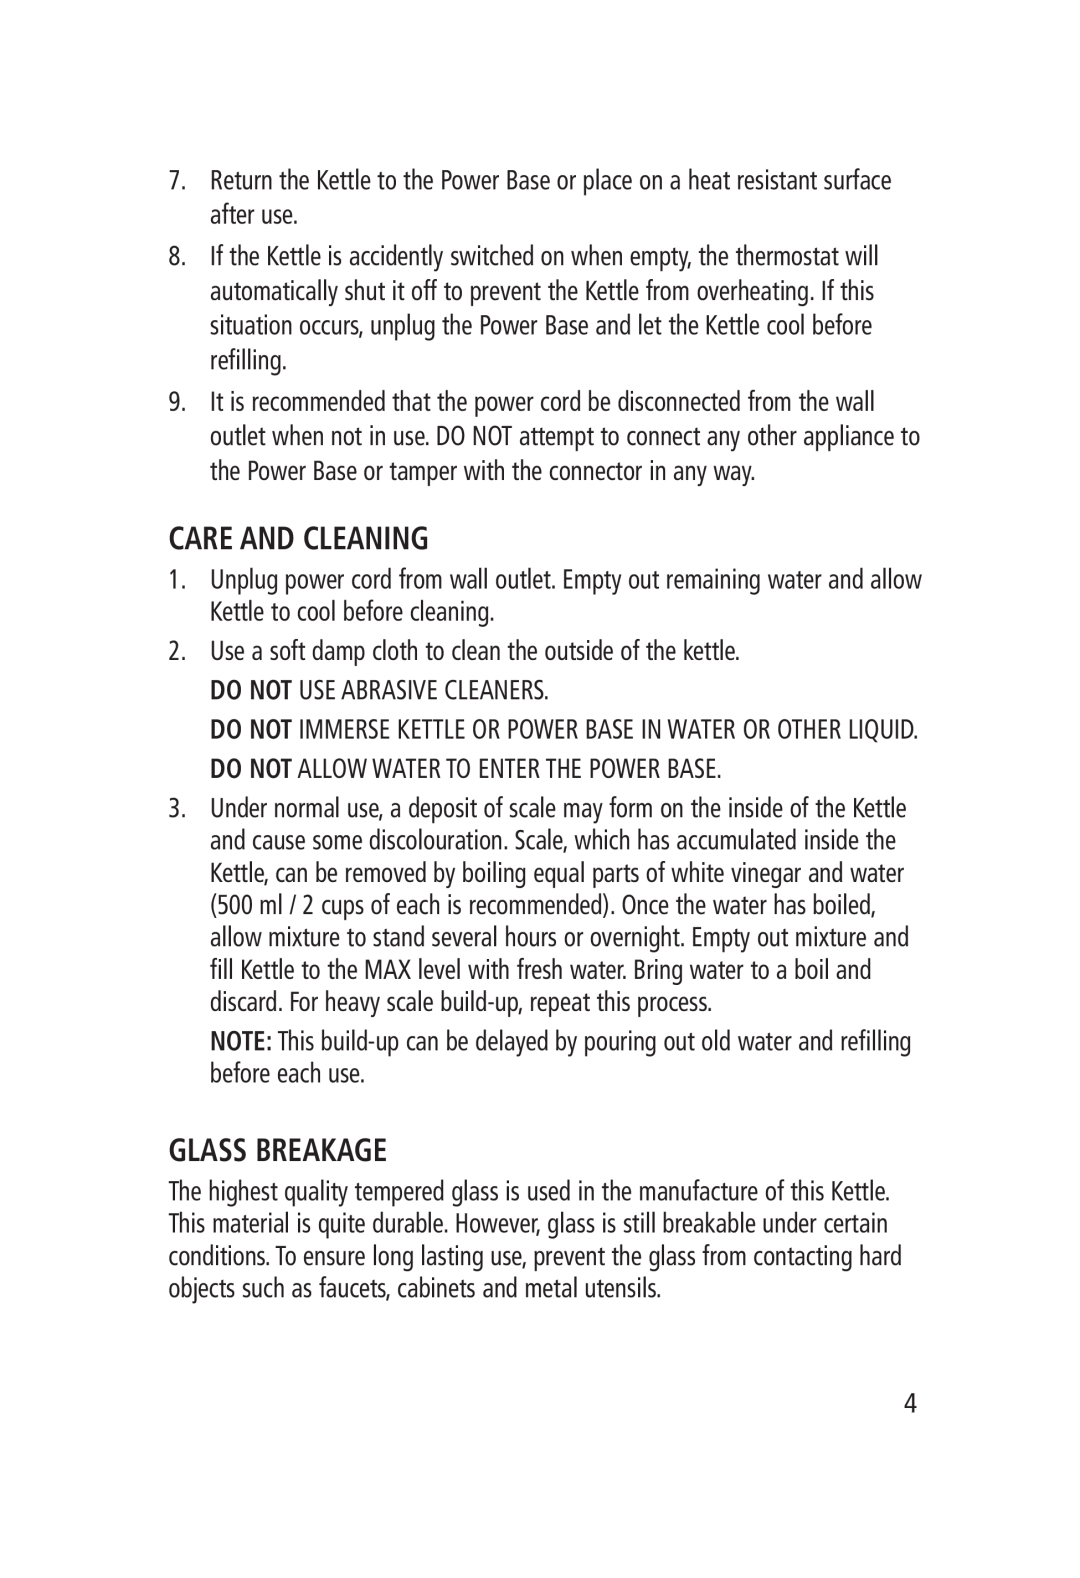 Salton GK-1202 manual Care And Cleaning, Glass Breakage 